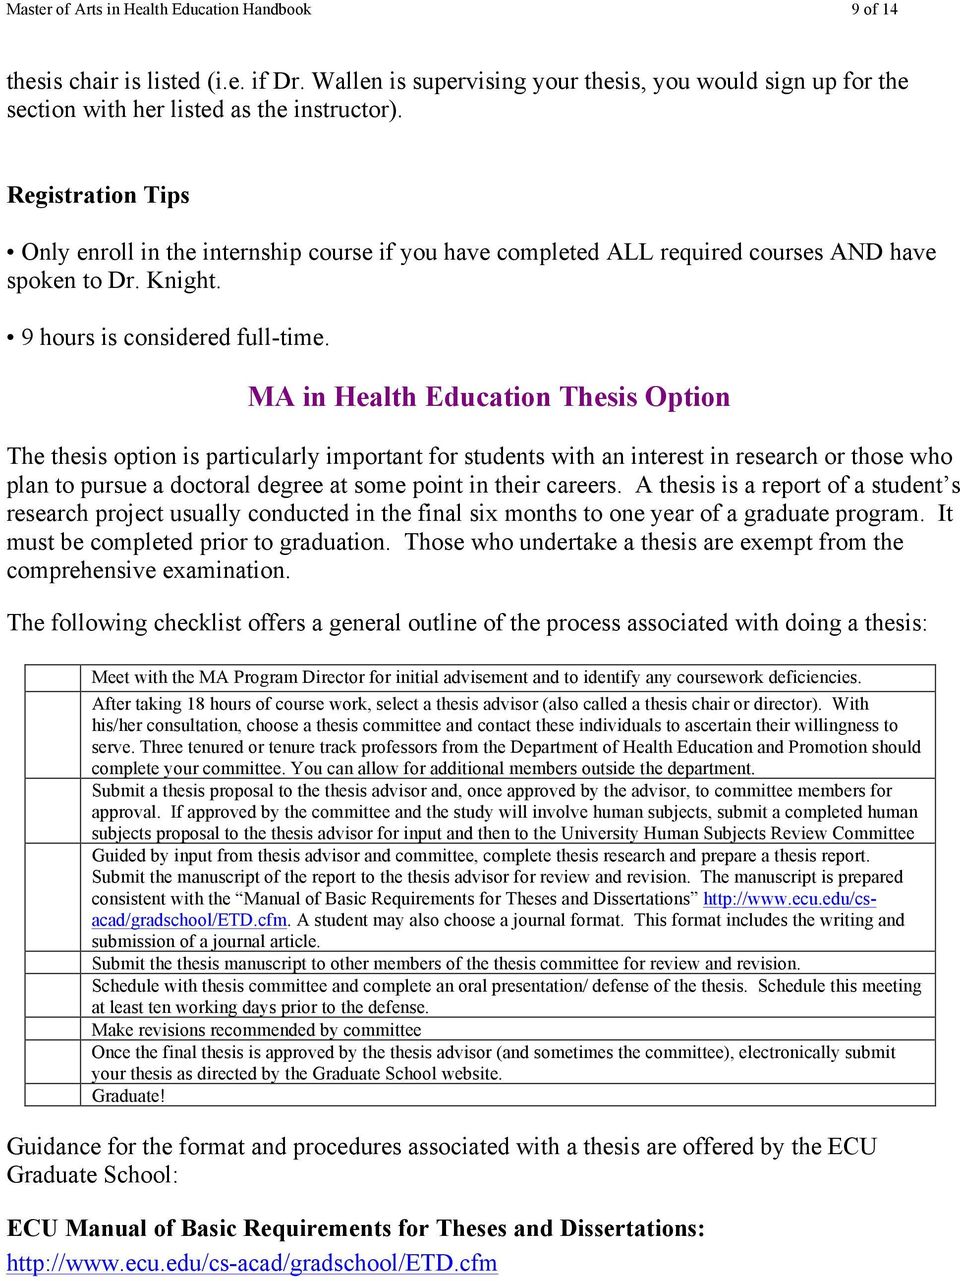 MA in Health Education Thesis Option The thesis option is particularly important for students with an interest in research or those who plan to pursue a doctoral degree at some point in their careers.